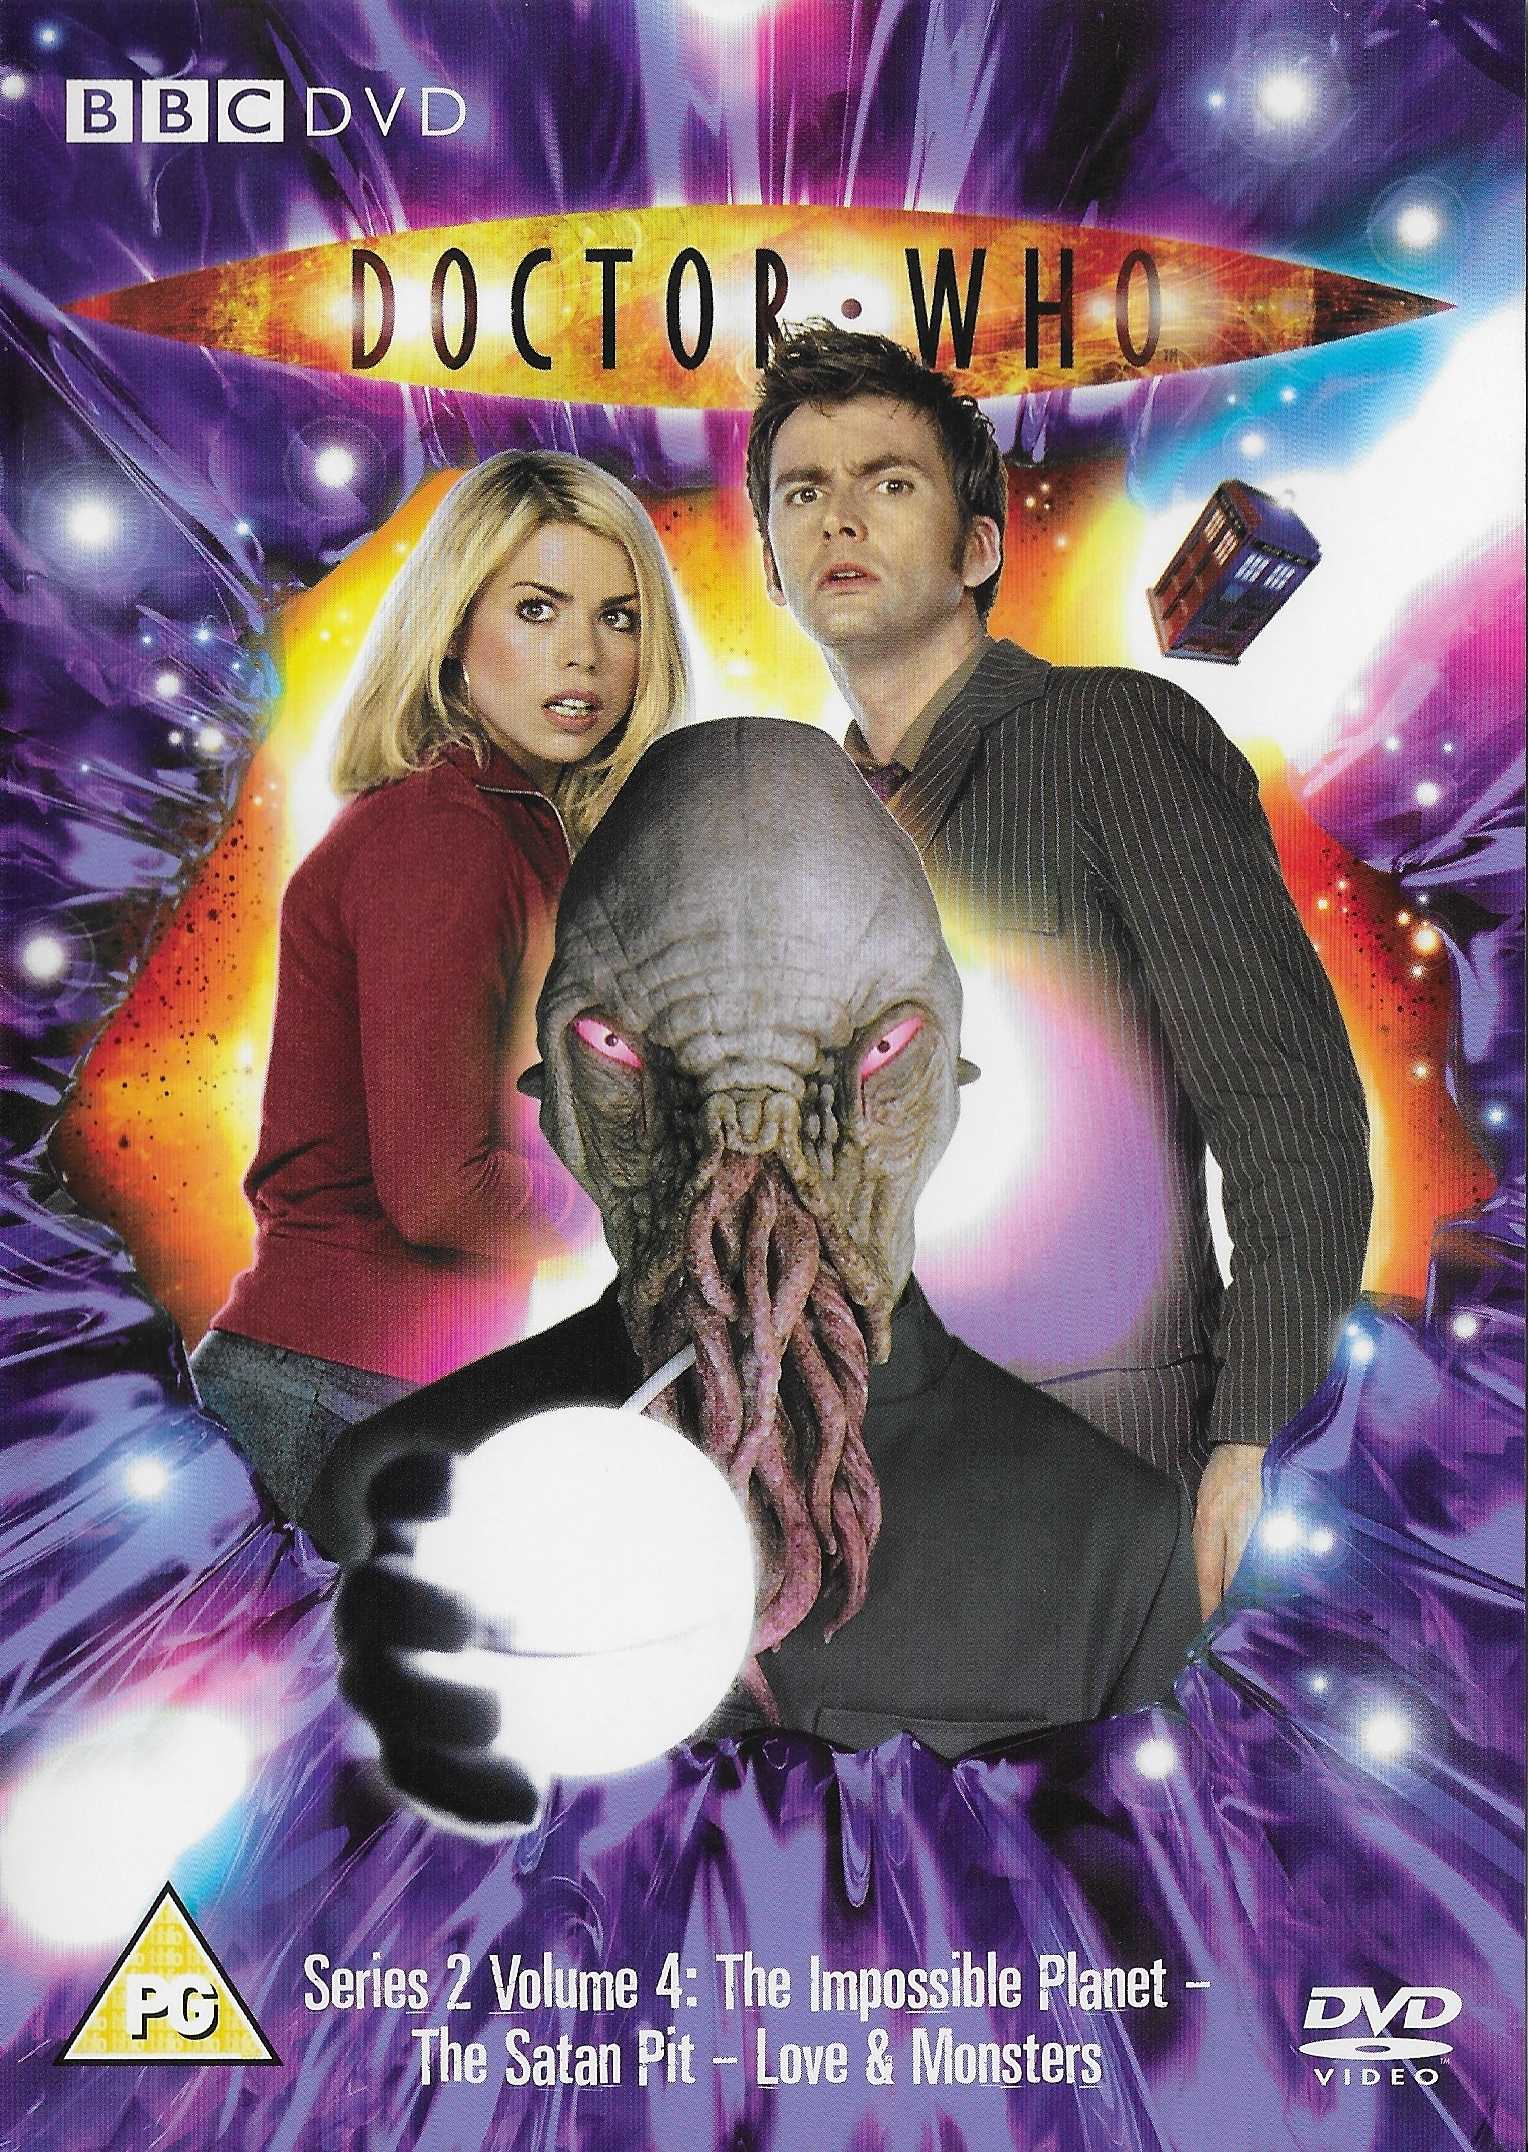 Picture of BBCDVD 1963 Doctor Who - Series 2, volume 4 by artist Matt Jones / Russell T Davies from the BBC dvds - Records and Tapes library